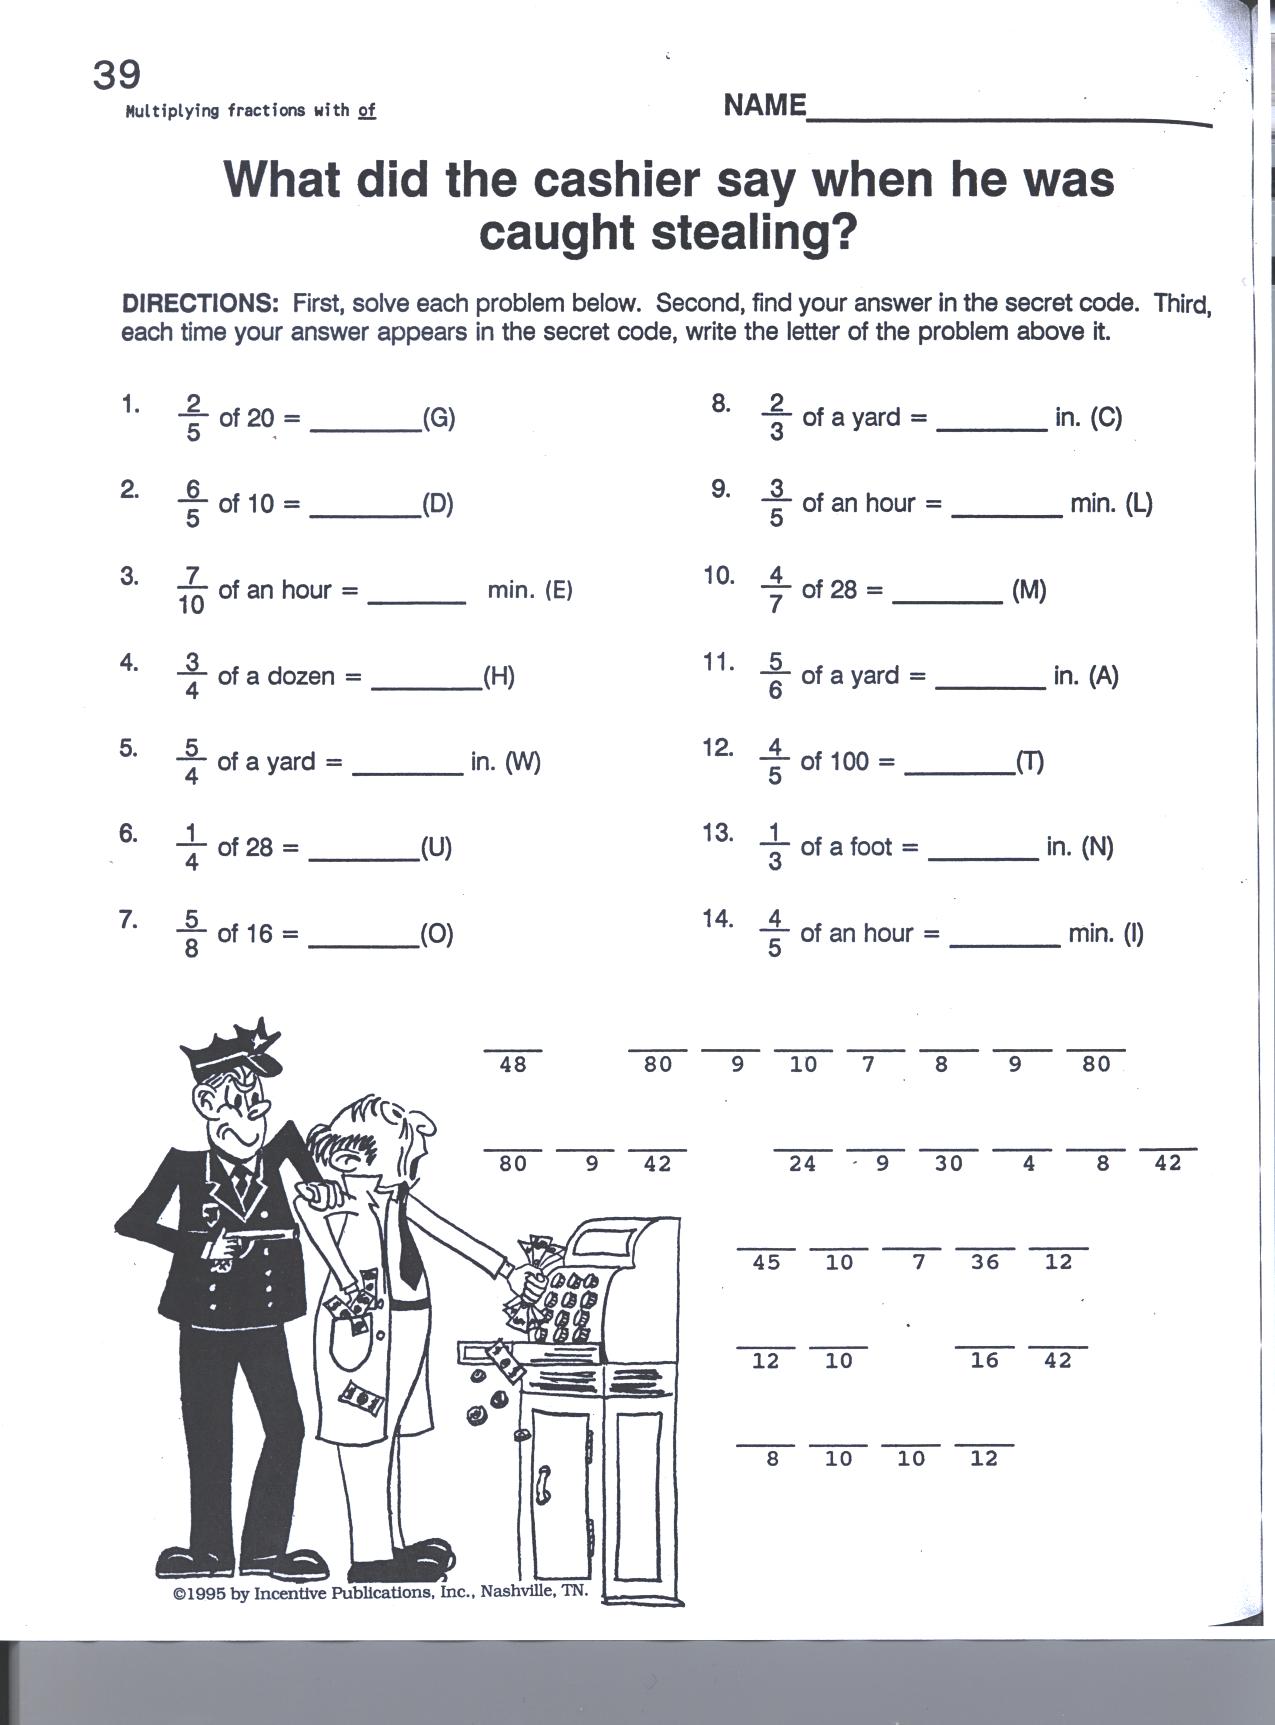 Ratio Worksheets For 7th Grade The Best Worksheets Image